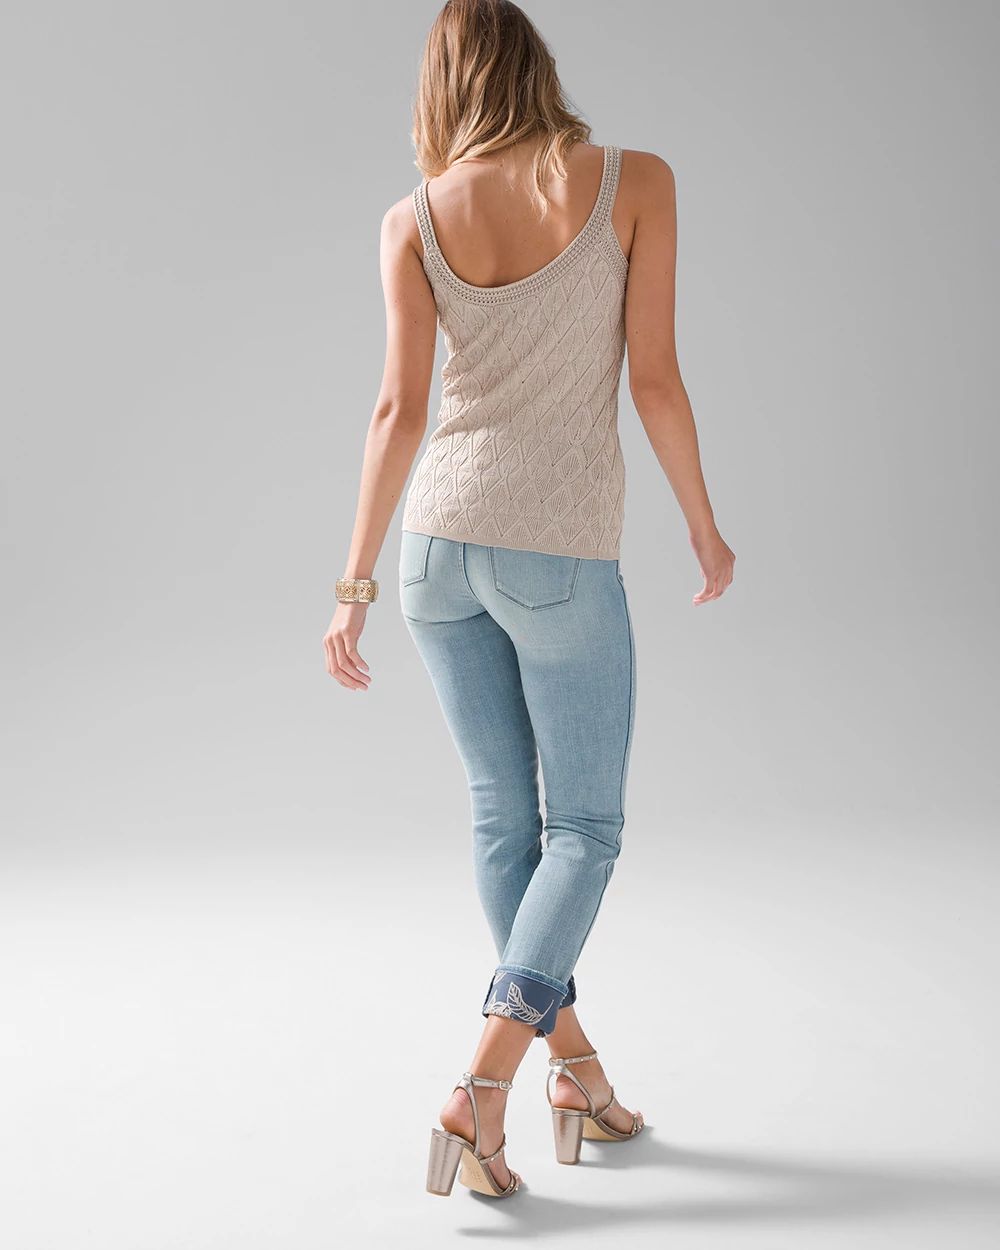 High Rise Everyday Soft Denim™ Scarf Hem Crop Jeans click to view larger image.